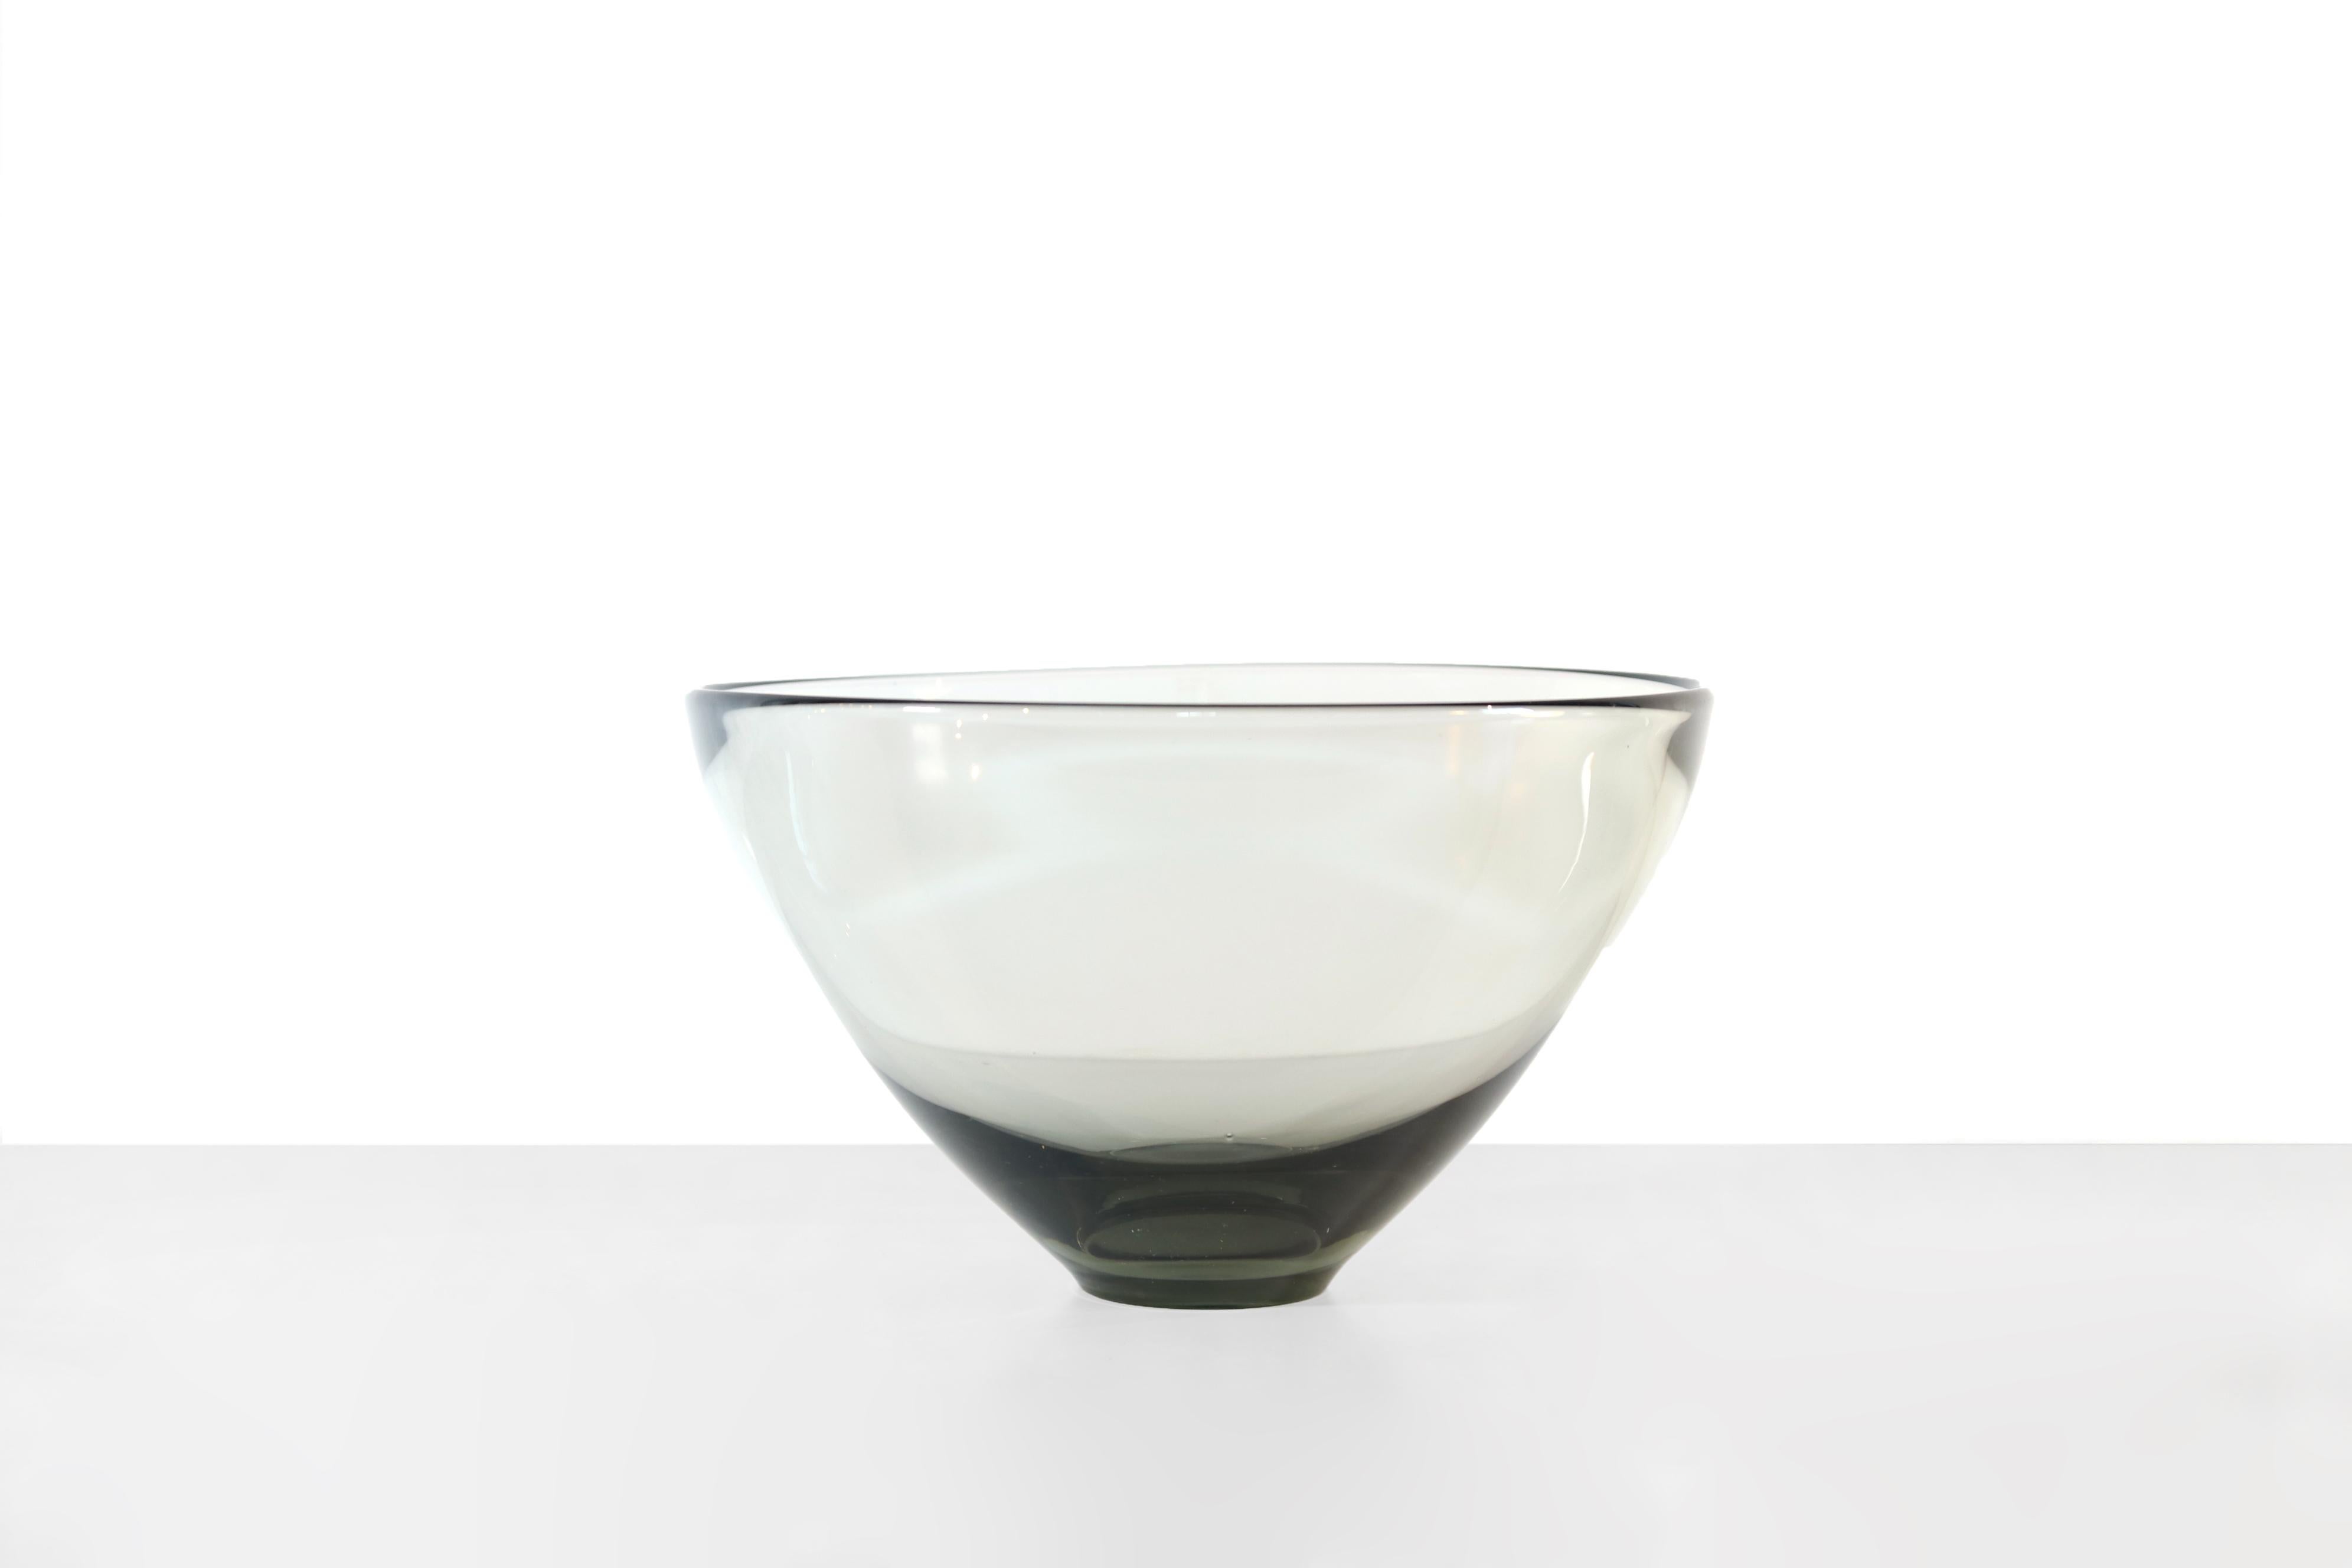 Beautifully designed glass bowl designed by Pet Lutken and made by Holmegaard in the 1960s in Denmark. This bowl is handmade and stick-blown from gray-brown smoked glass with a beautiful heavy bulb bottom. The bowl is marked and can also be seen in